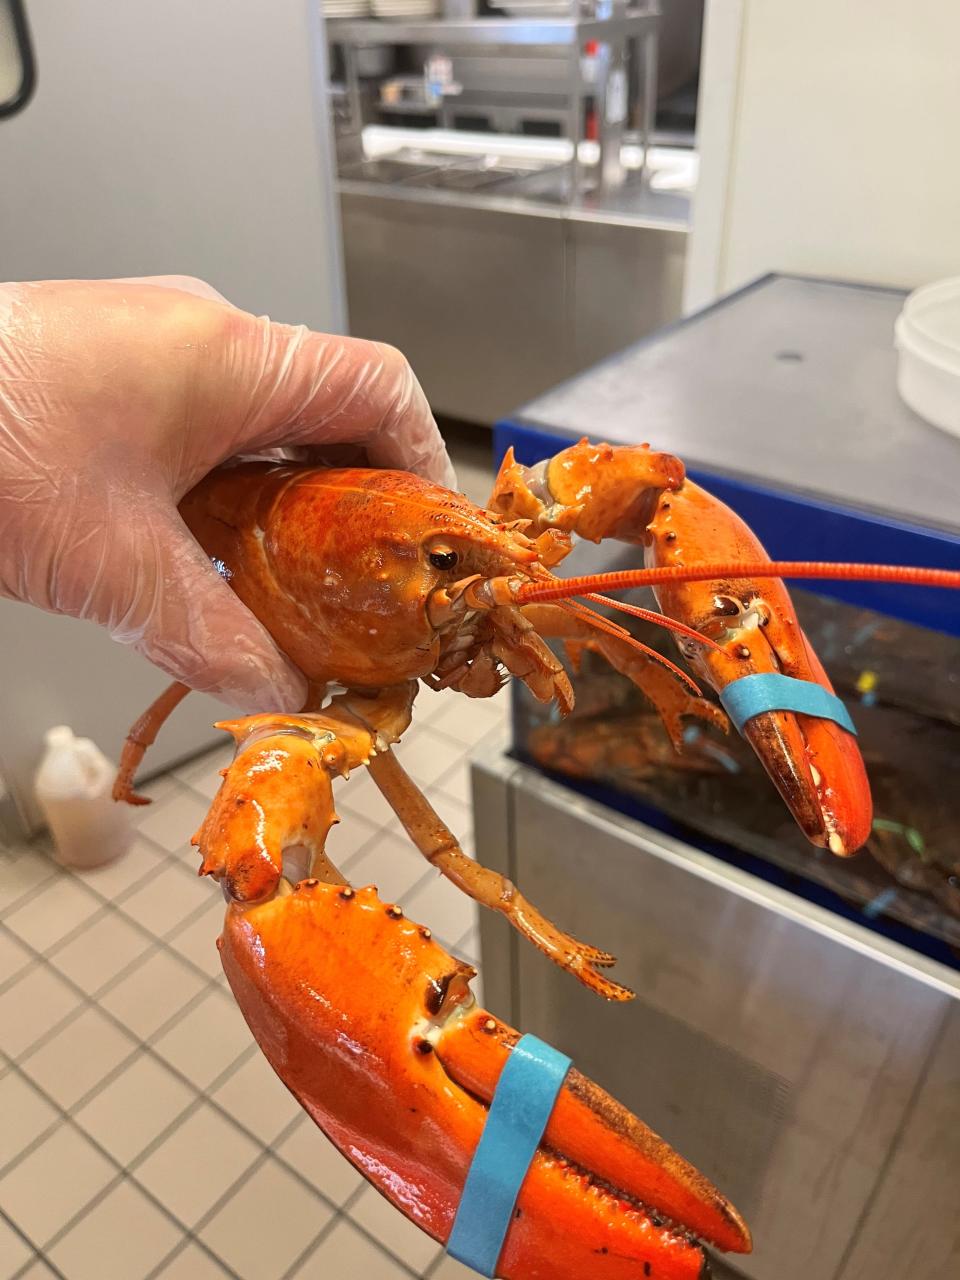 A rare orange lobster discovered at a supermarket in Williamsville, New York